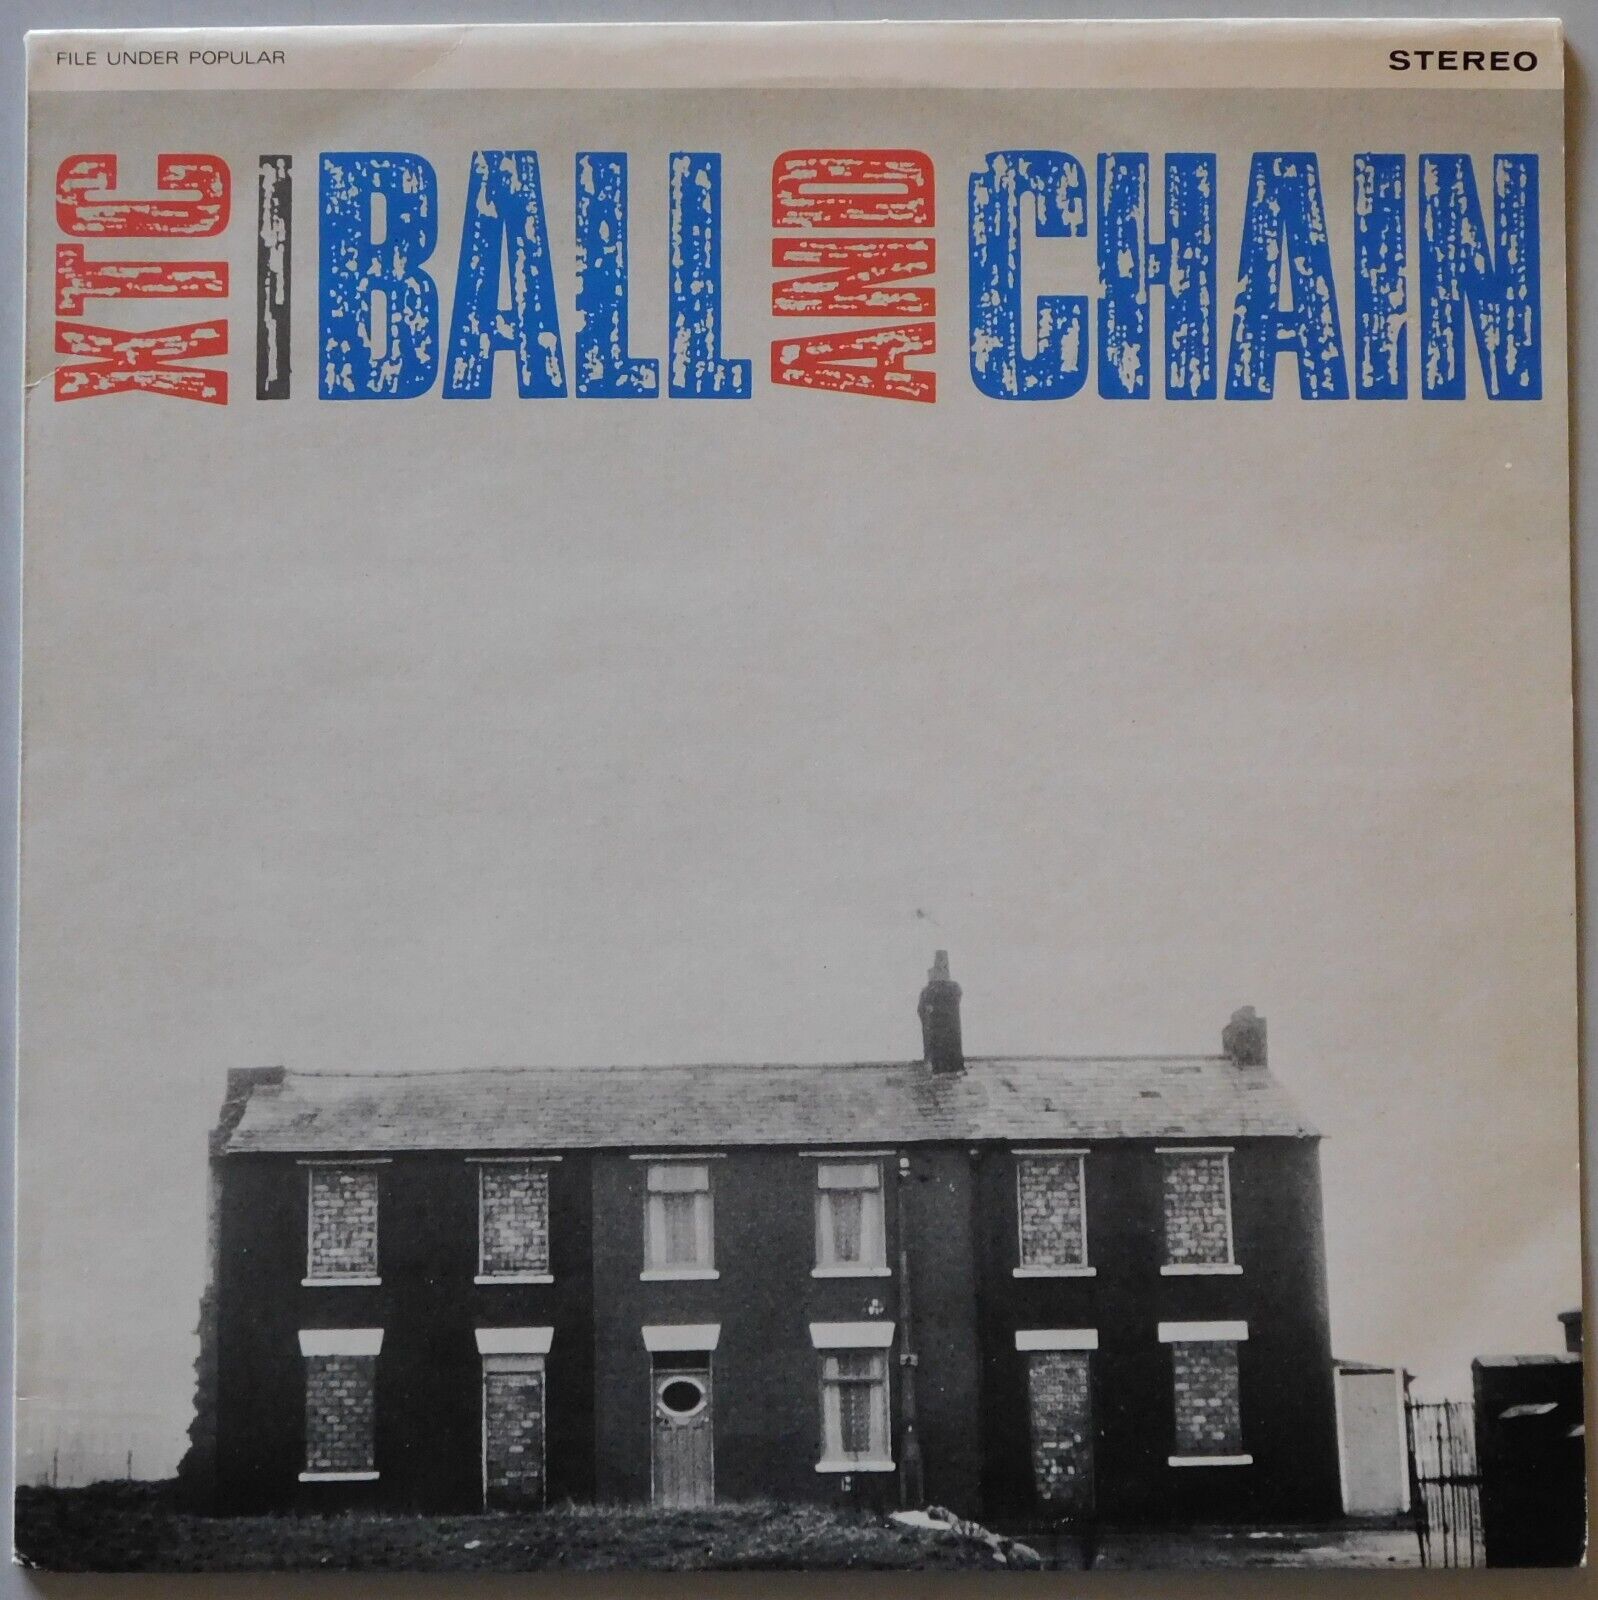 XTC “BALL AND CHAIN”” – 1982 USED UK ISSUE 12” SINGLE/EP – BRITISH NEW WAVE/POP